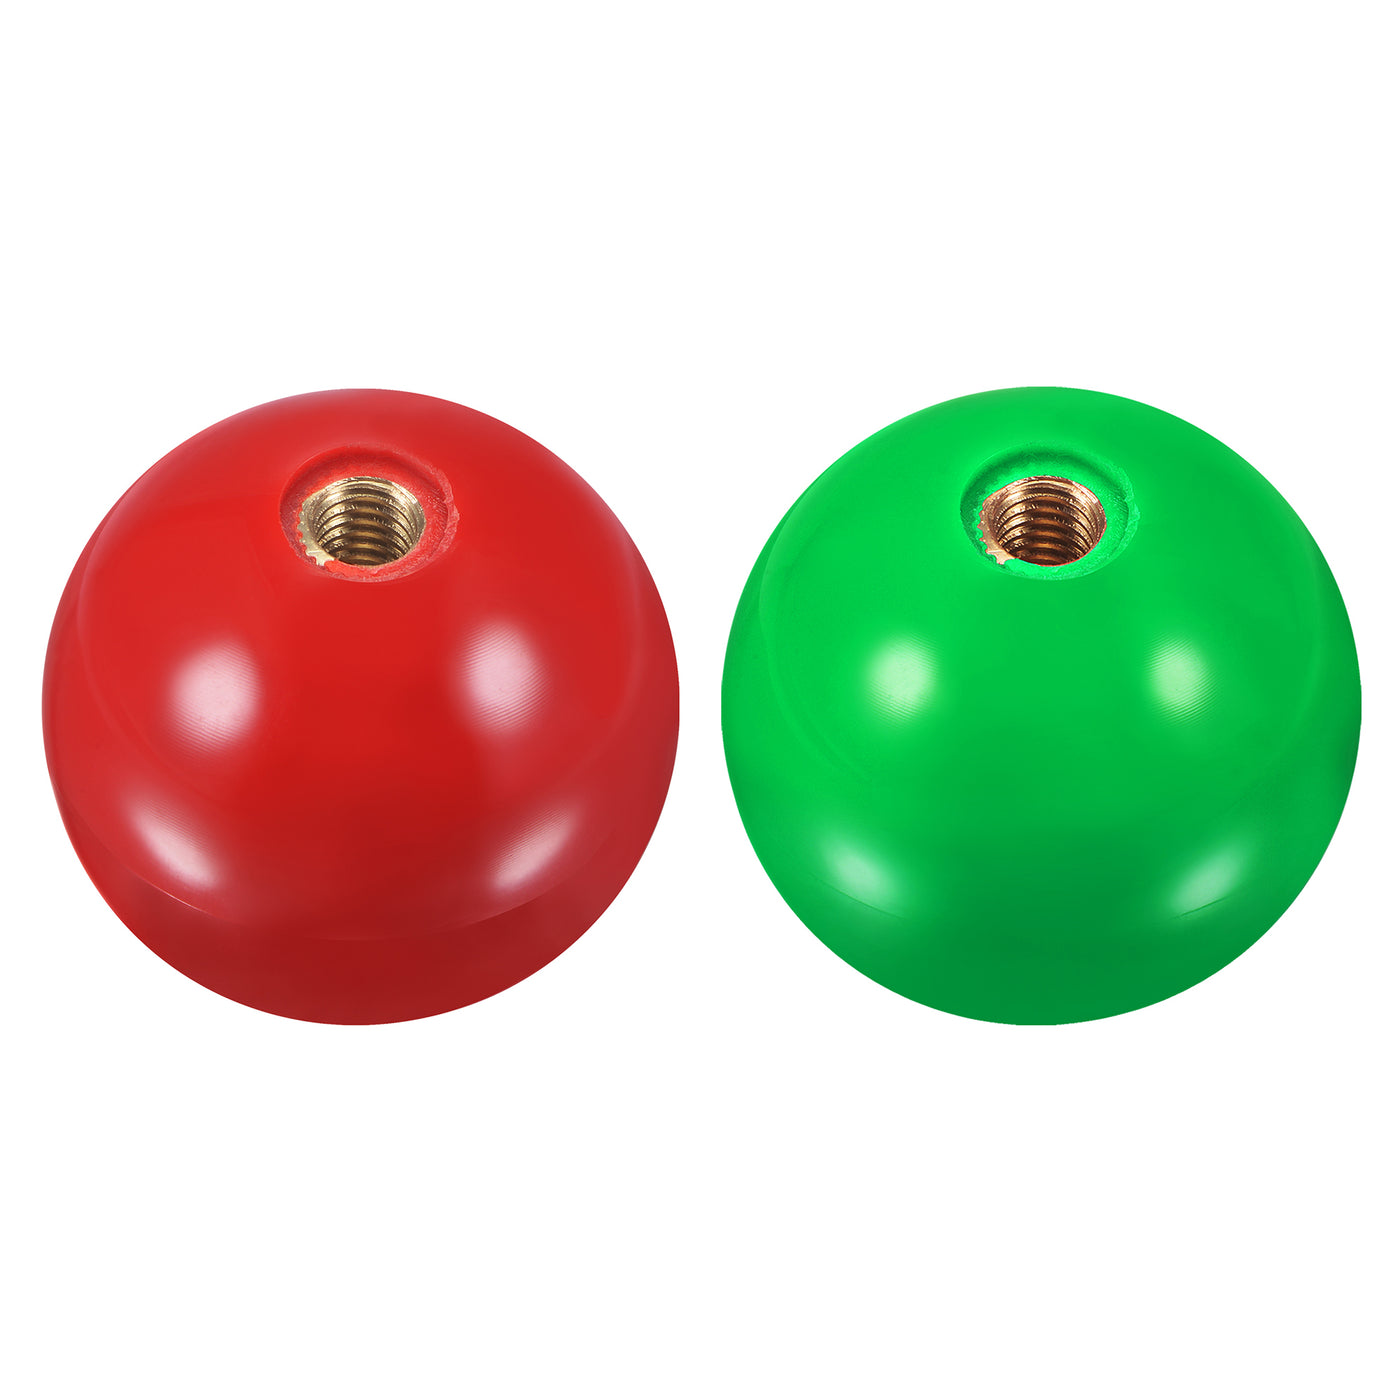 uxcell Uxcell Joystick Head Rocker Ball Top Handle Arcade Game Replacement Red/Green